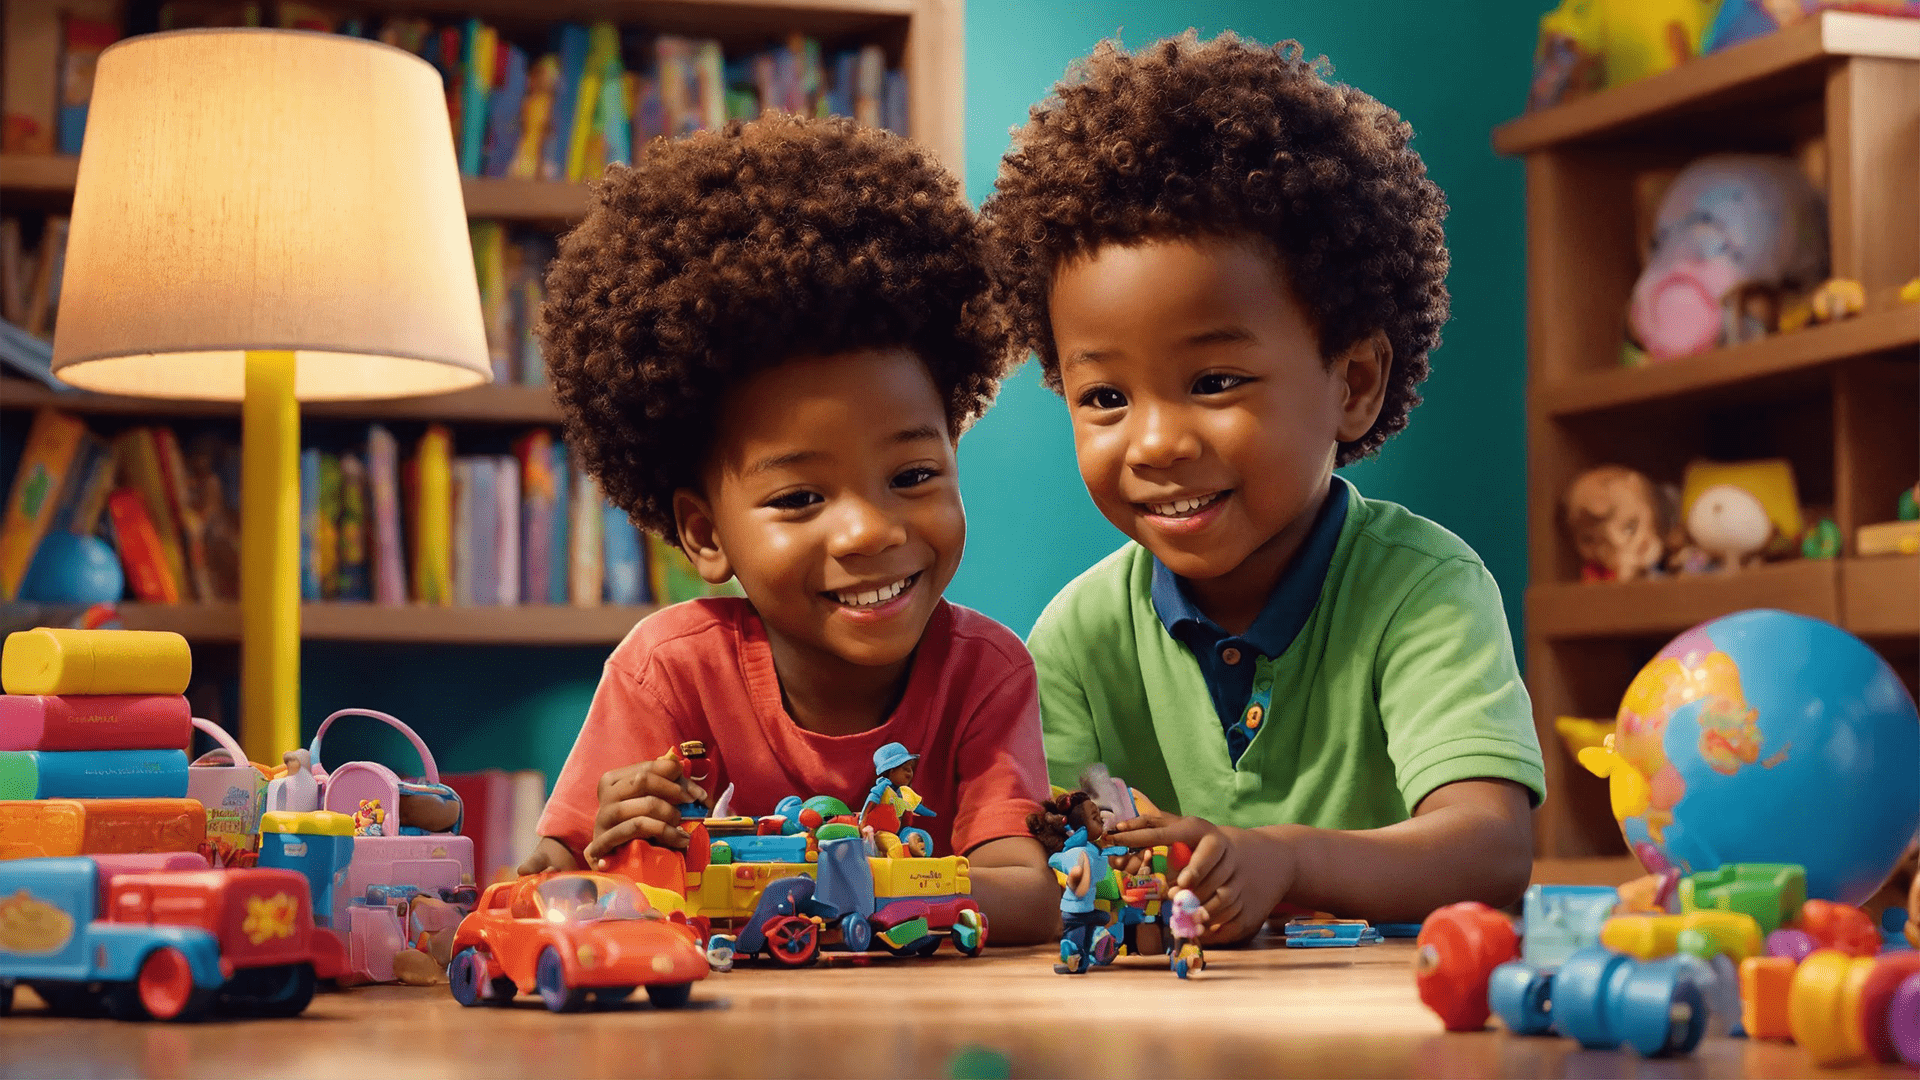 Positively Inclusive Dolls., Welcome Home, BLACK DOLLS MATTER